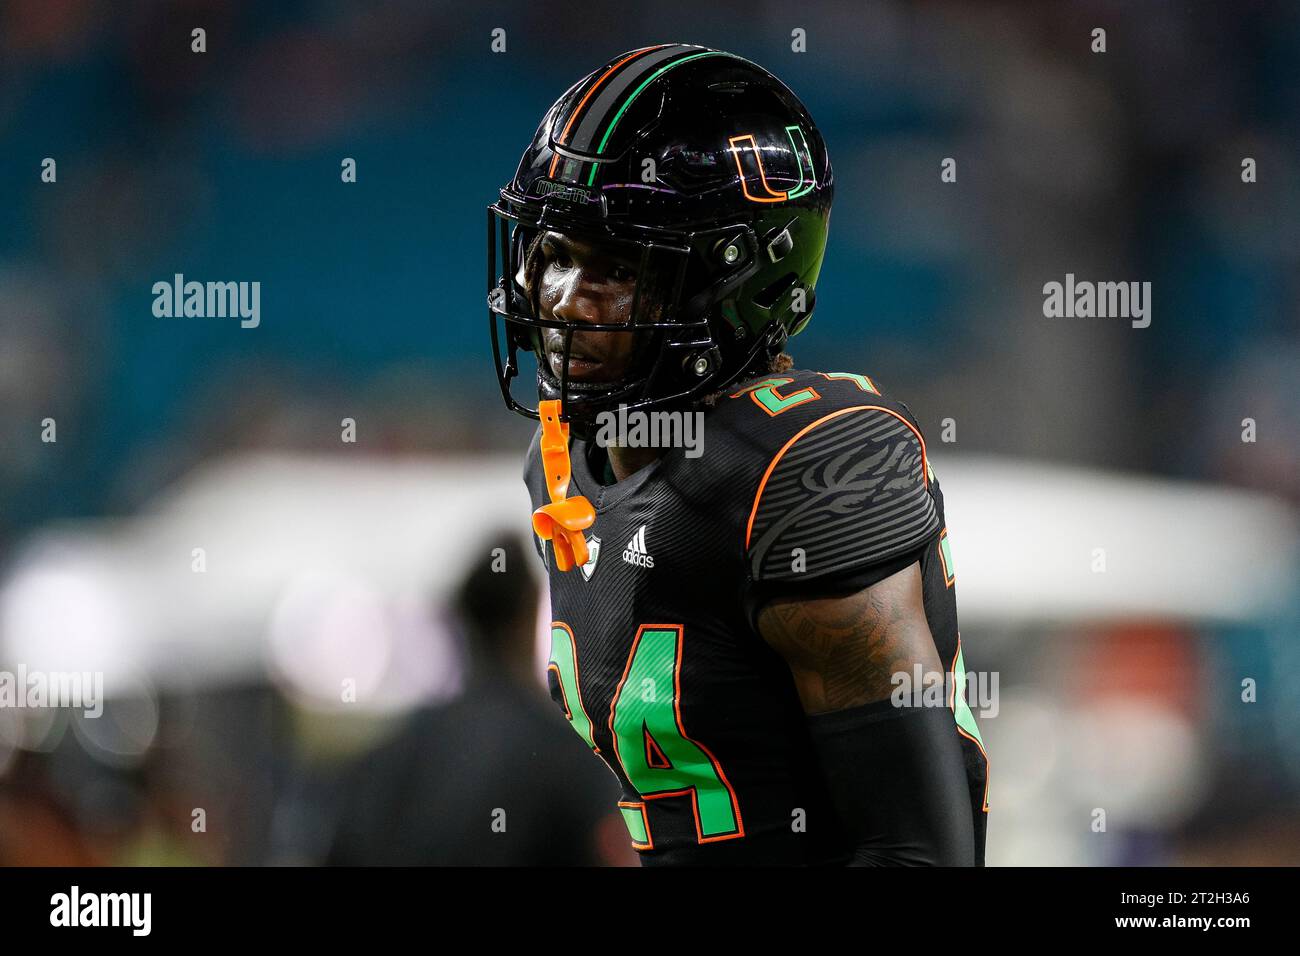 Miami Hurricanes running back Chris Johnson Jr. (24) warms up prior to a college football regular season game against the Georgia Tech Yellow Jackets, Stock Photo